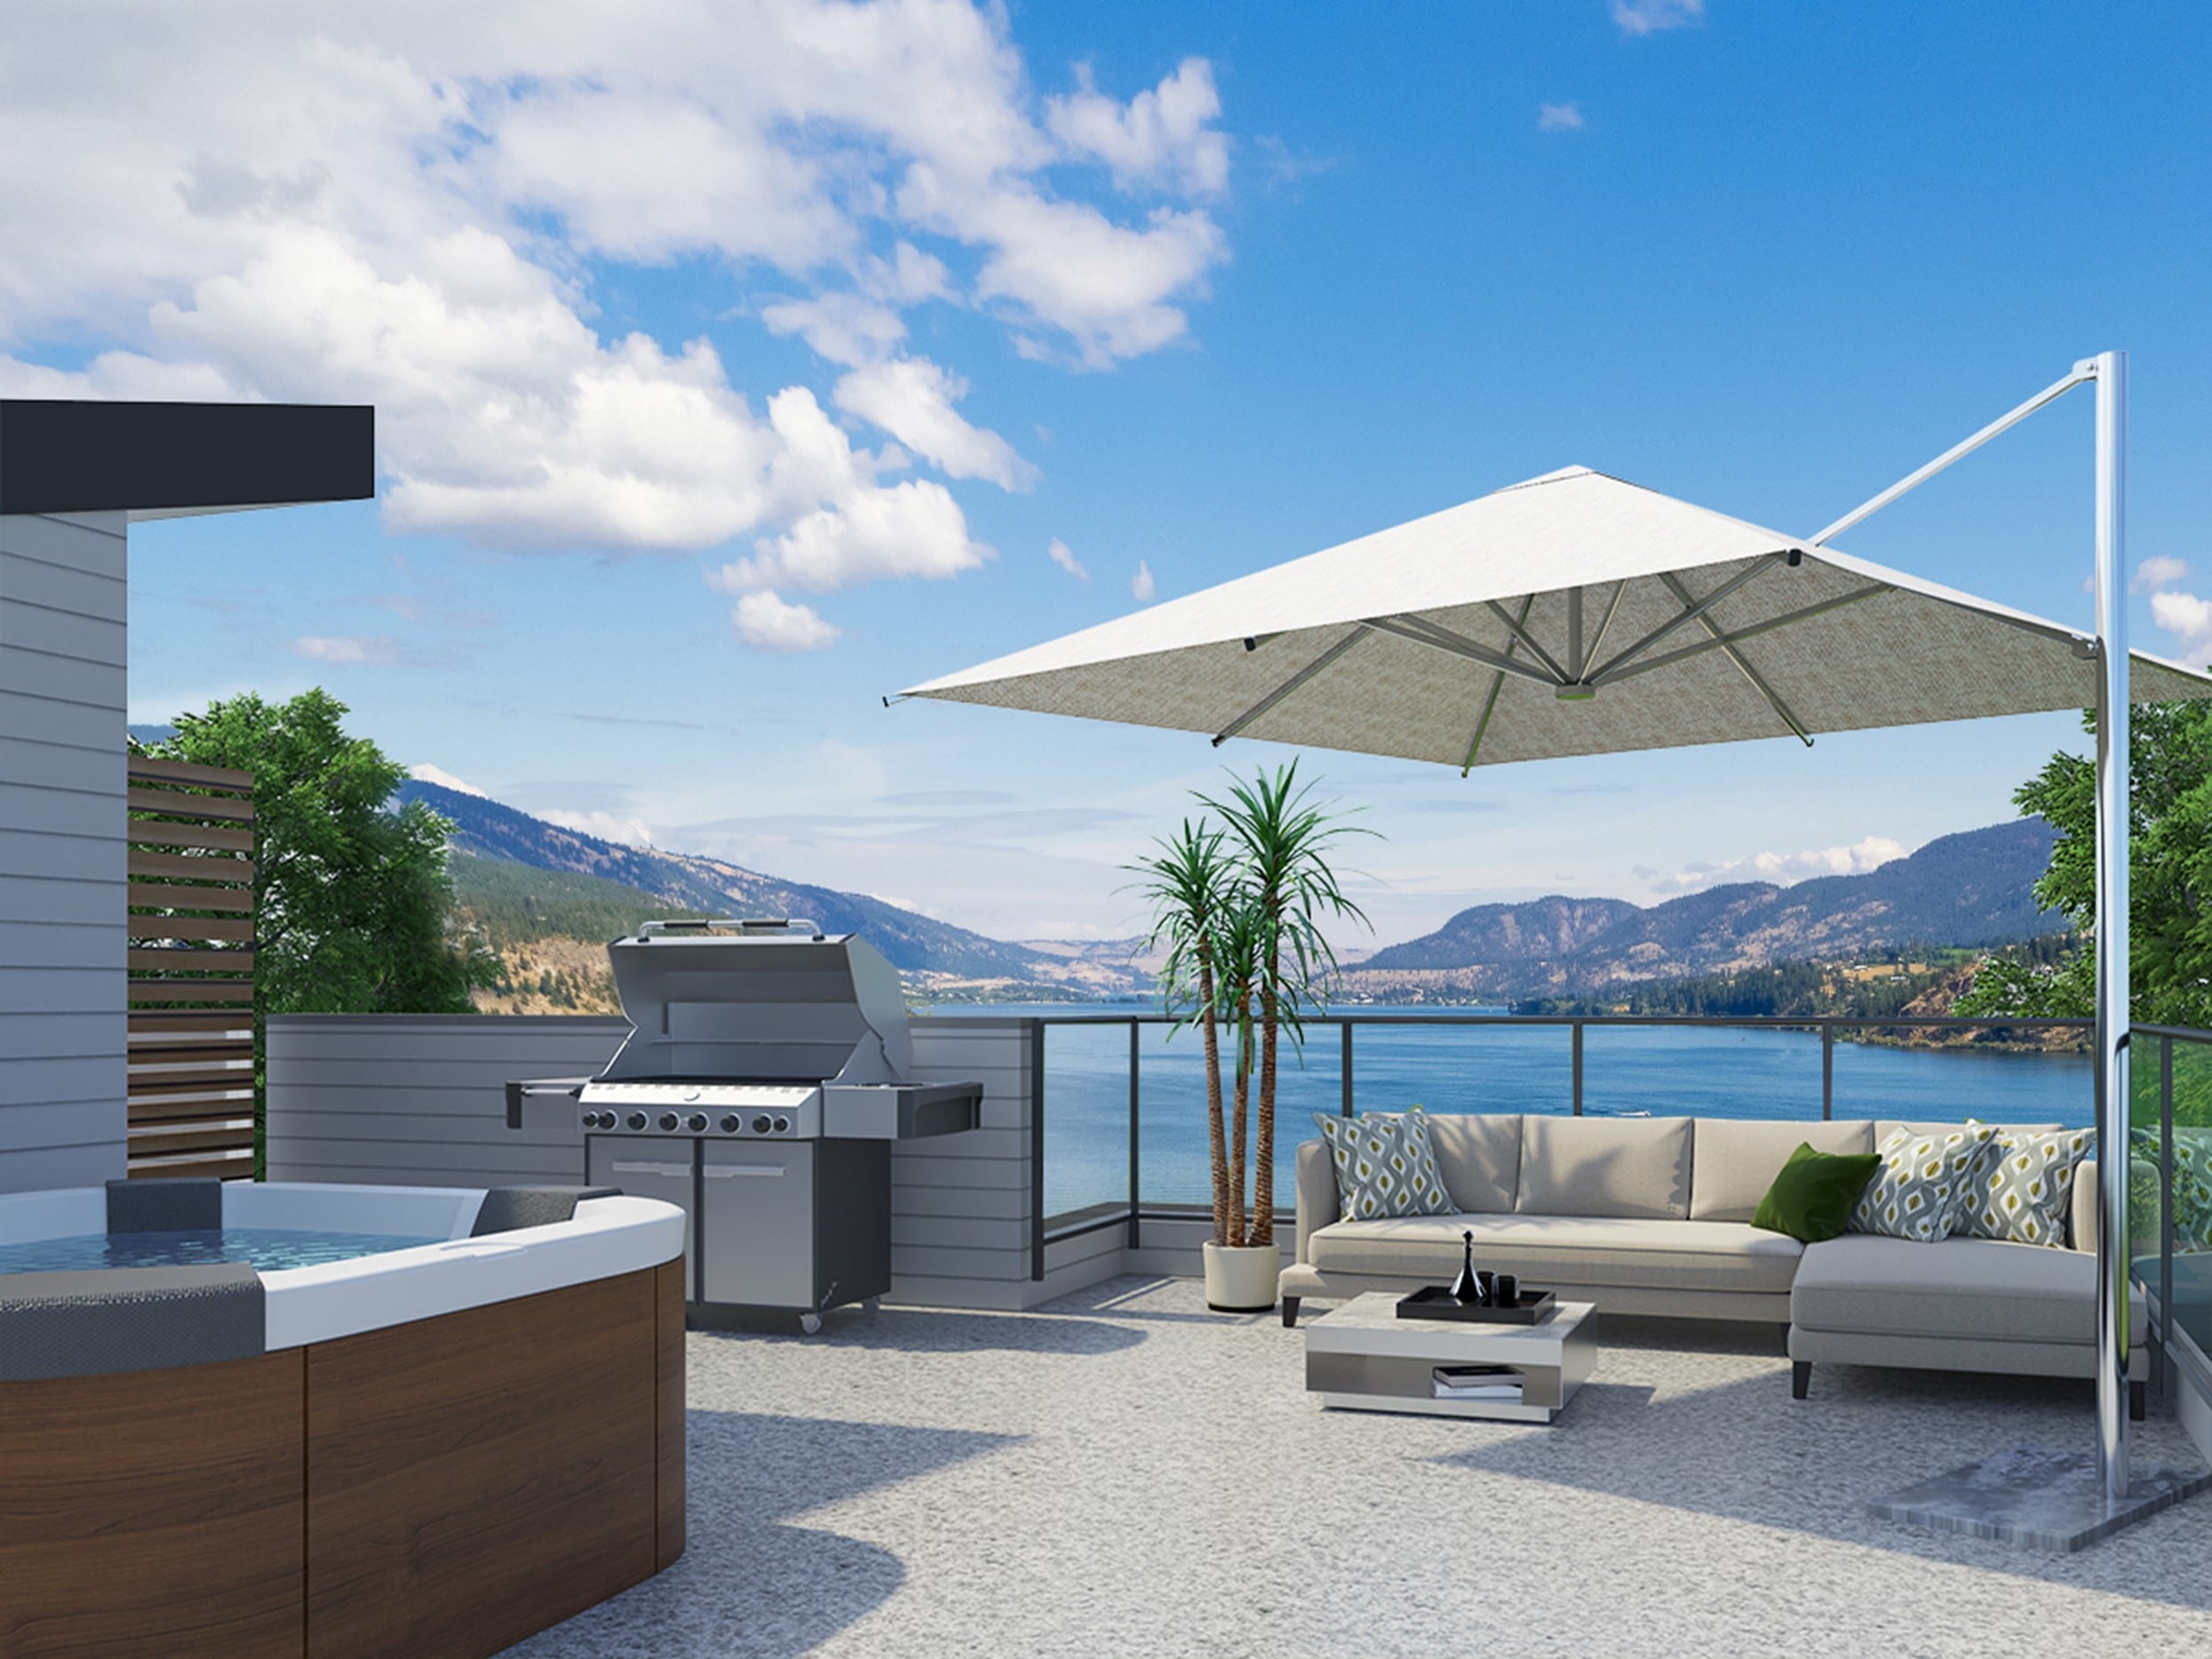 600+ sq. ft. rooftop patio with lake view at The Landing at Wood Lake